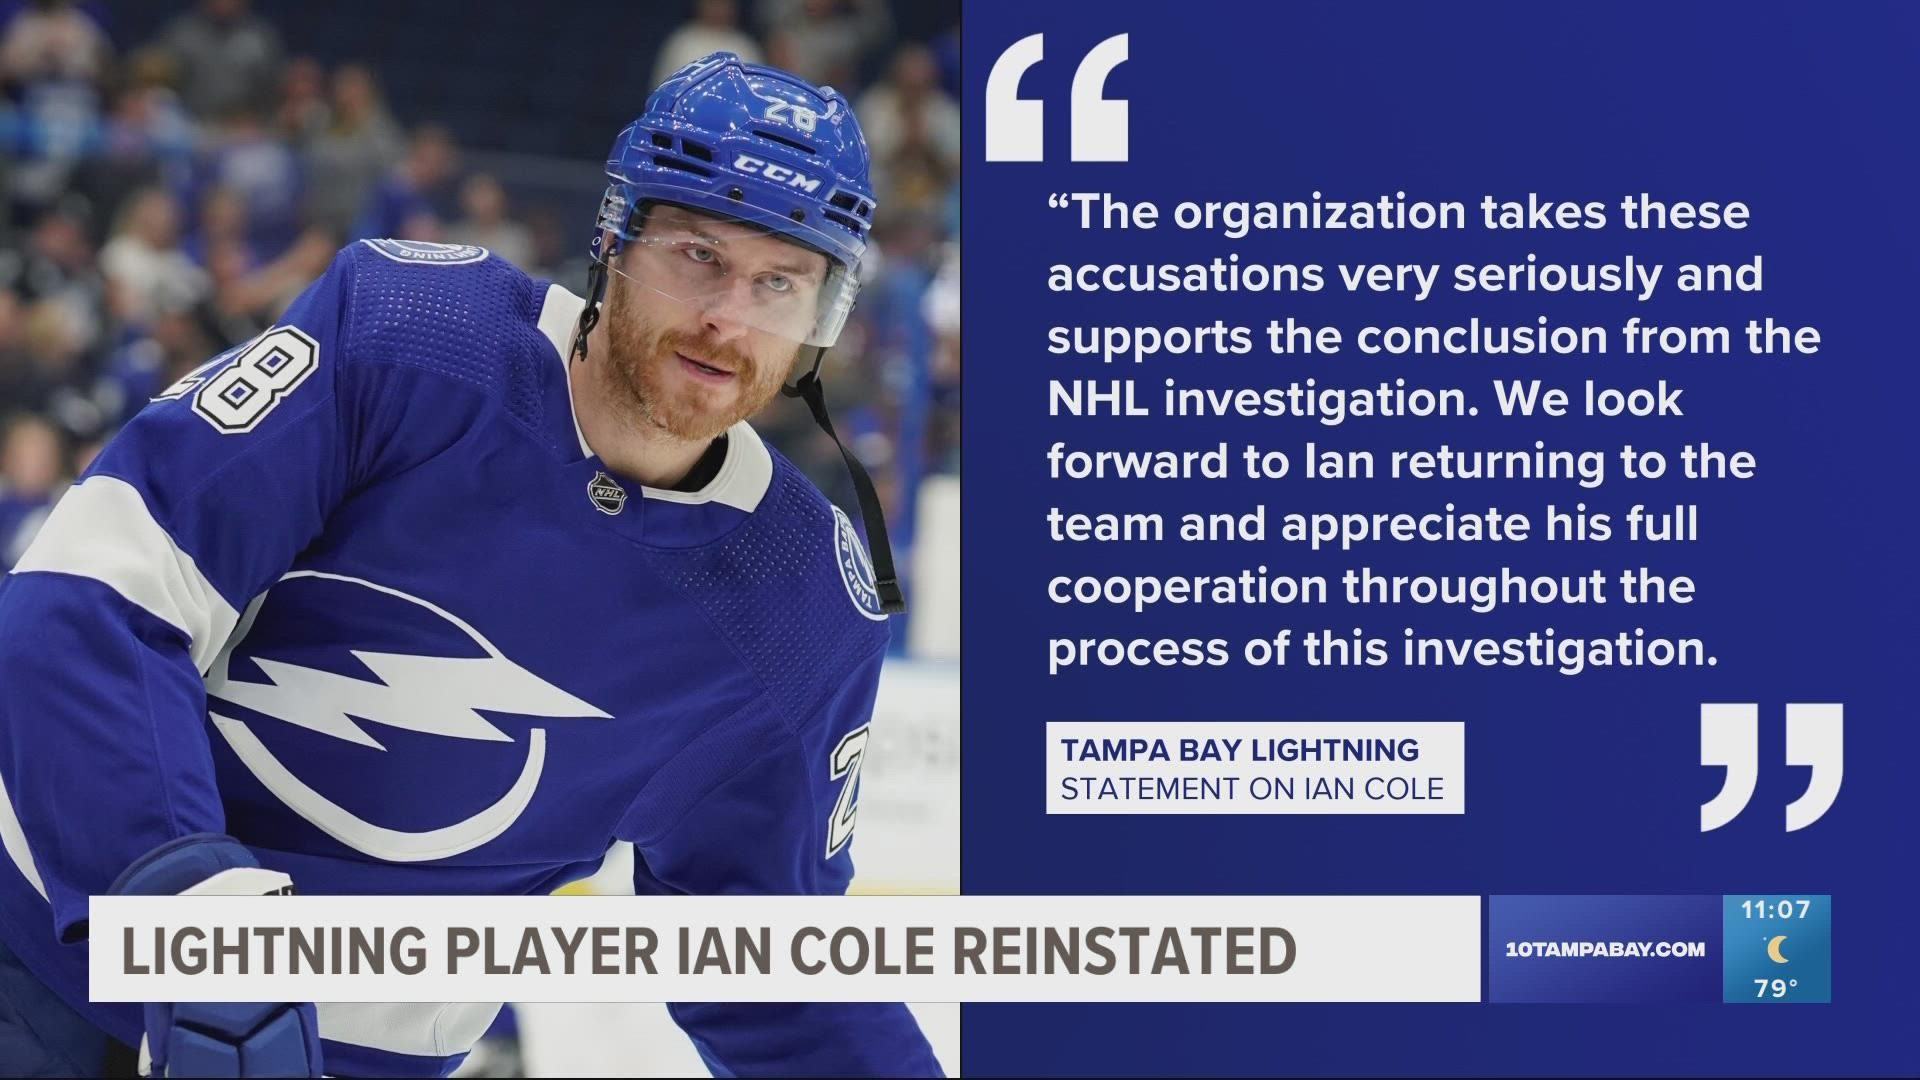 This comes after Cole was suspended while the NHL investigated allegations that the defenseman groomed and sexually abused a minor.